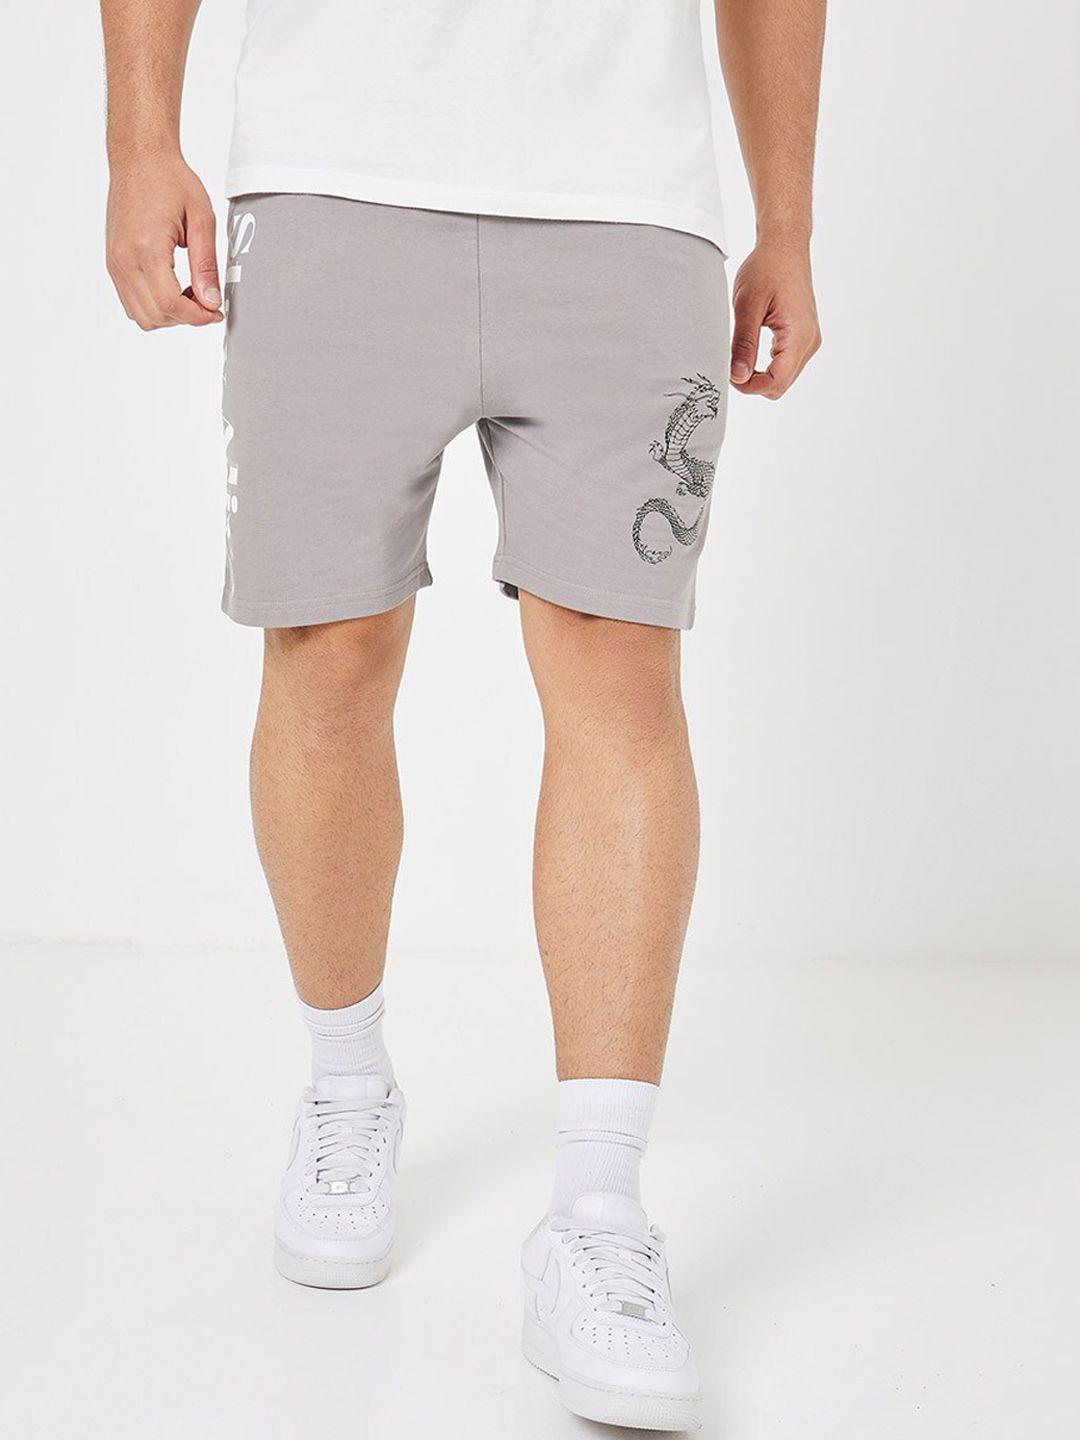 styli-men-grey-dragon-graphic-printed-mid-rise-pure-cotton-shorts